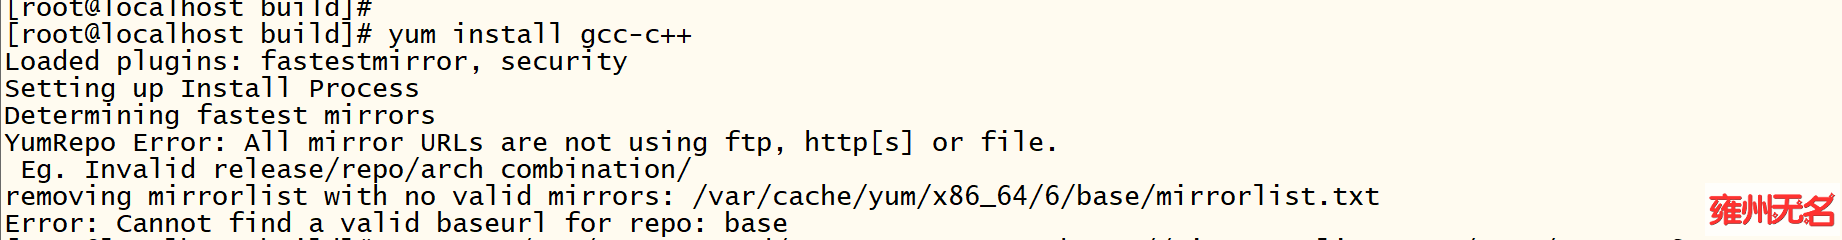 centos6进行yum安装软件时报错Error: Cannot find a valid baseurl for repo: base_c++